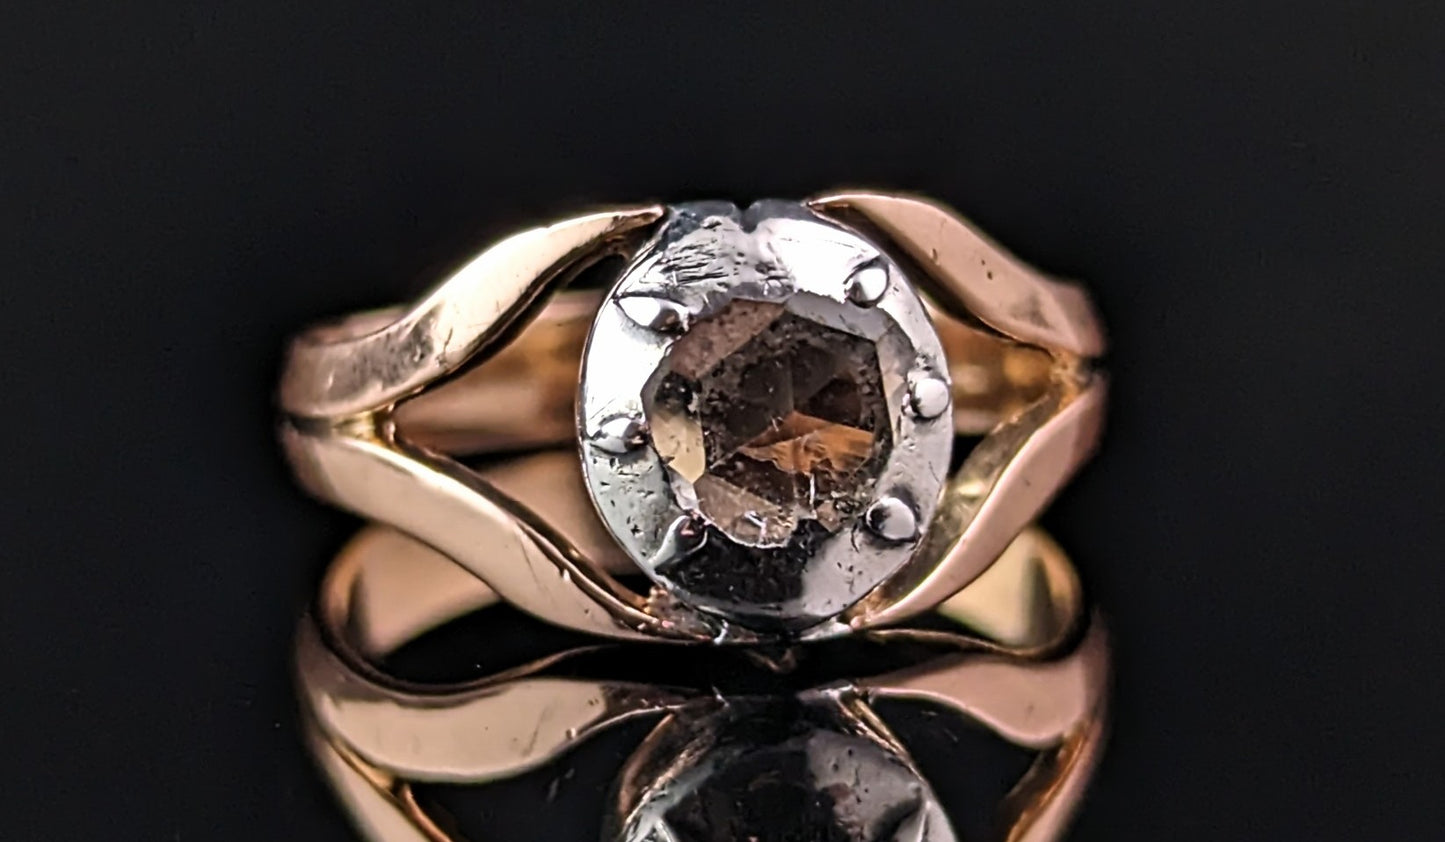 Antique Rose cut diamond conversion ring, 9ct rose gold and silver